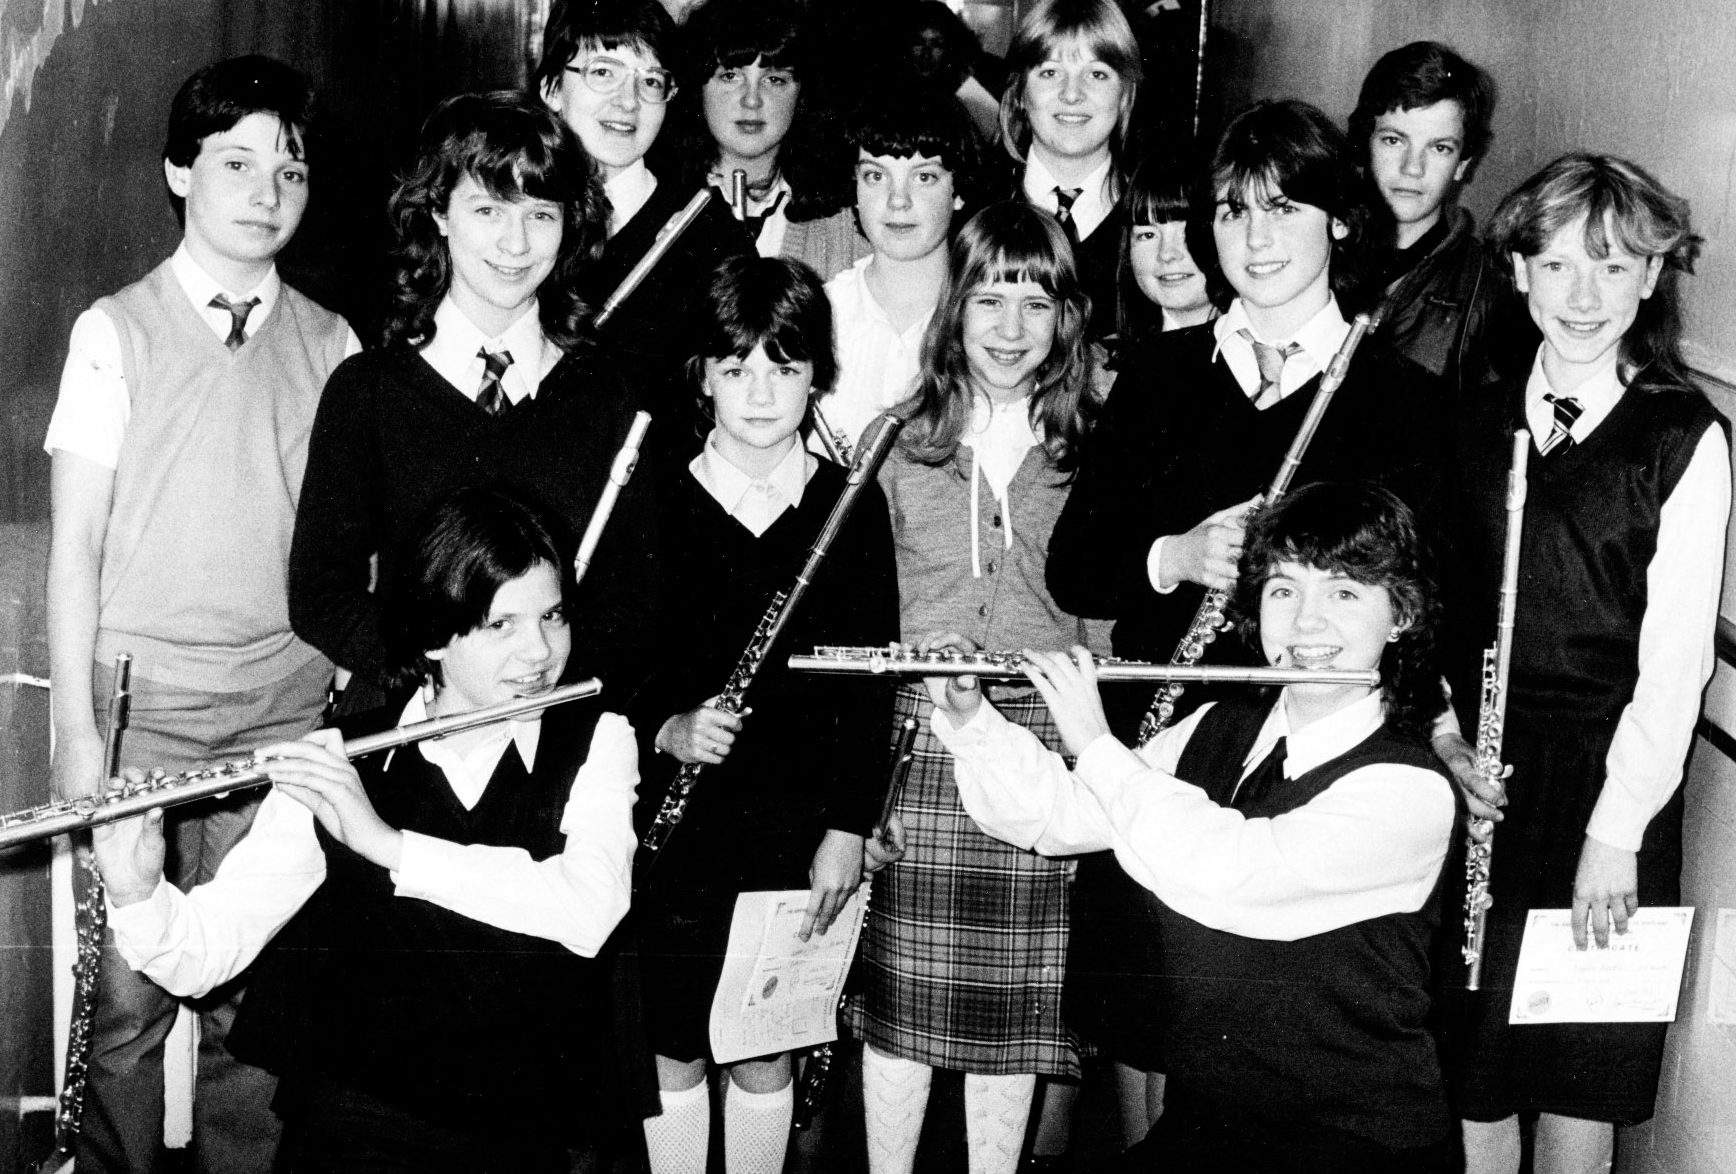 Angela Stone, front left, and Angela Young, joint winners of the 15-and-under flute section, with other participants of the 1983 Aberdeen and North East of Scotland Music Festival.